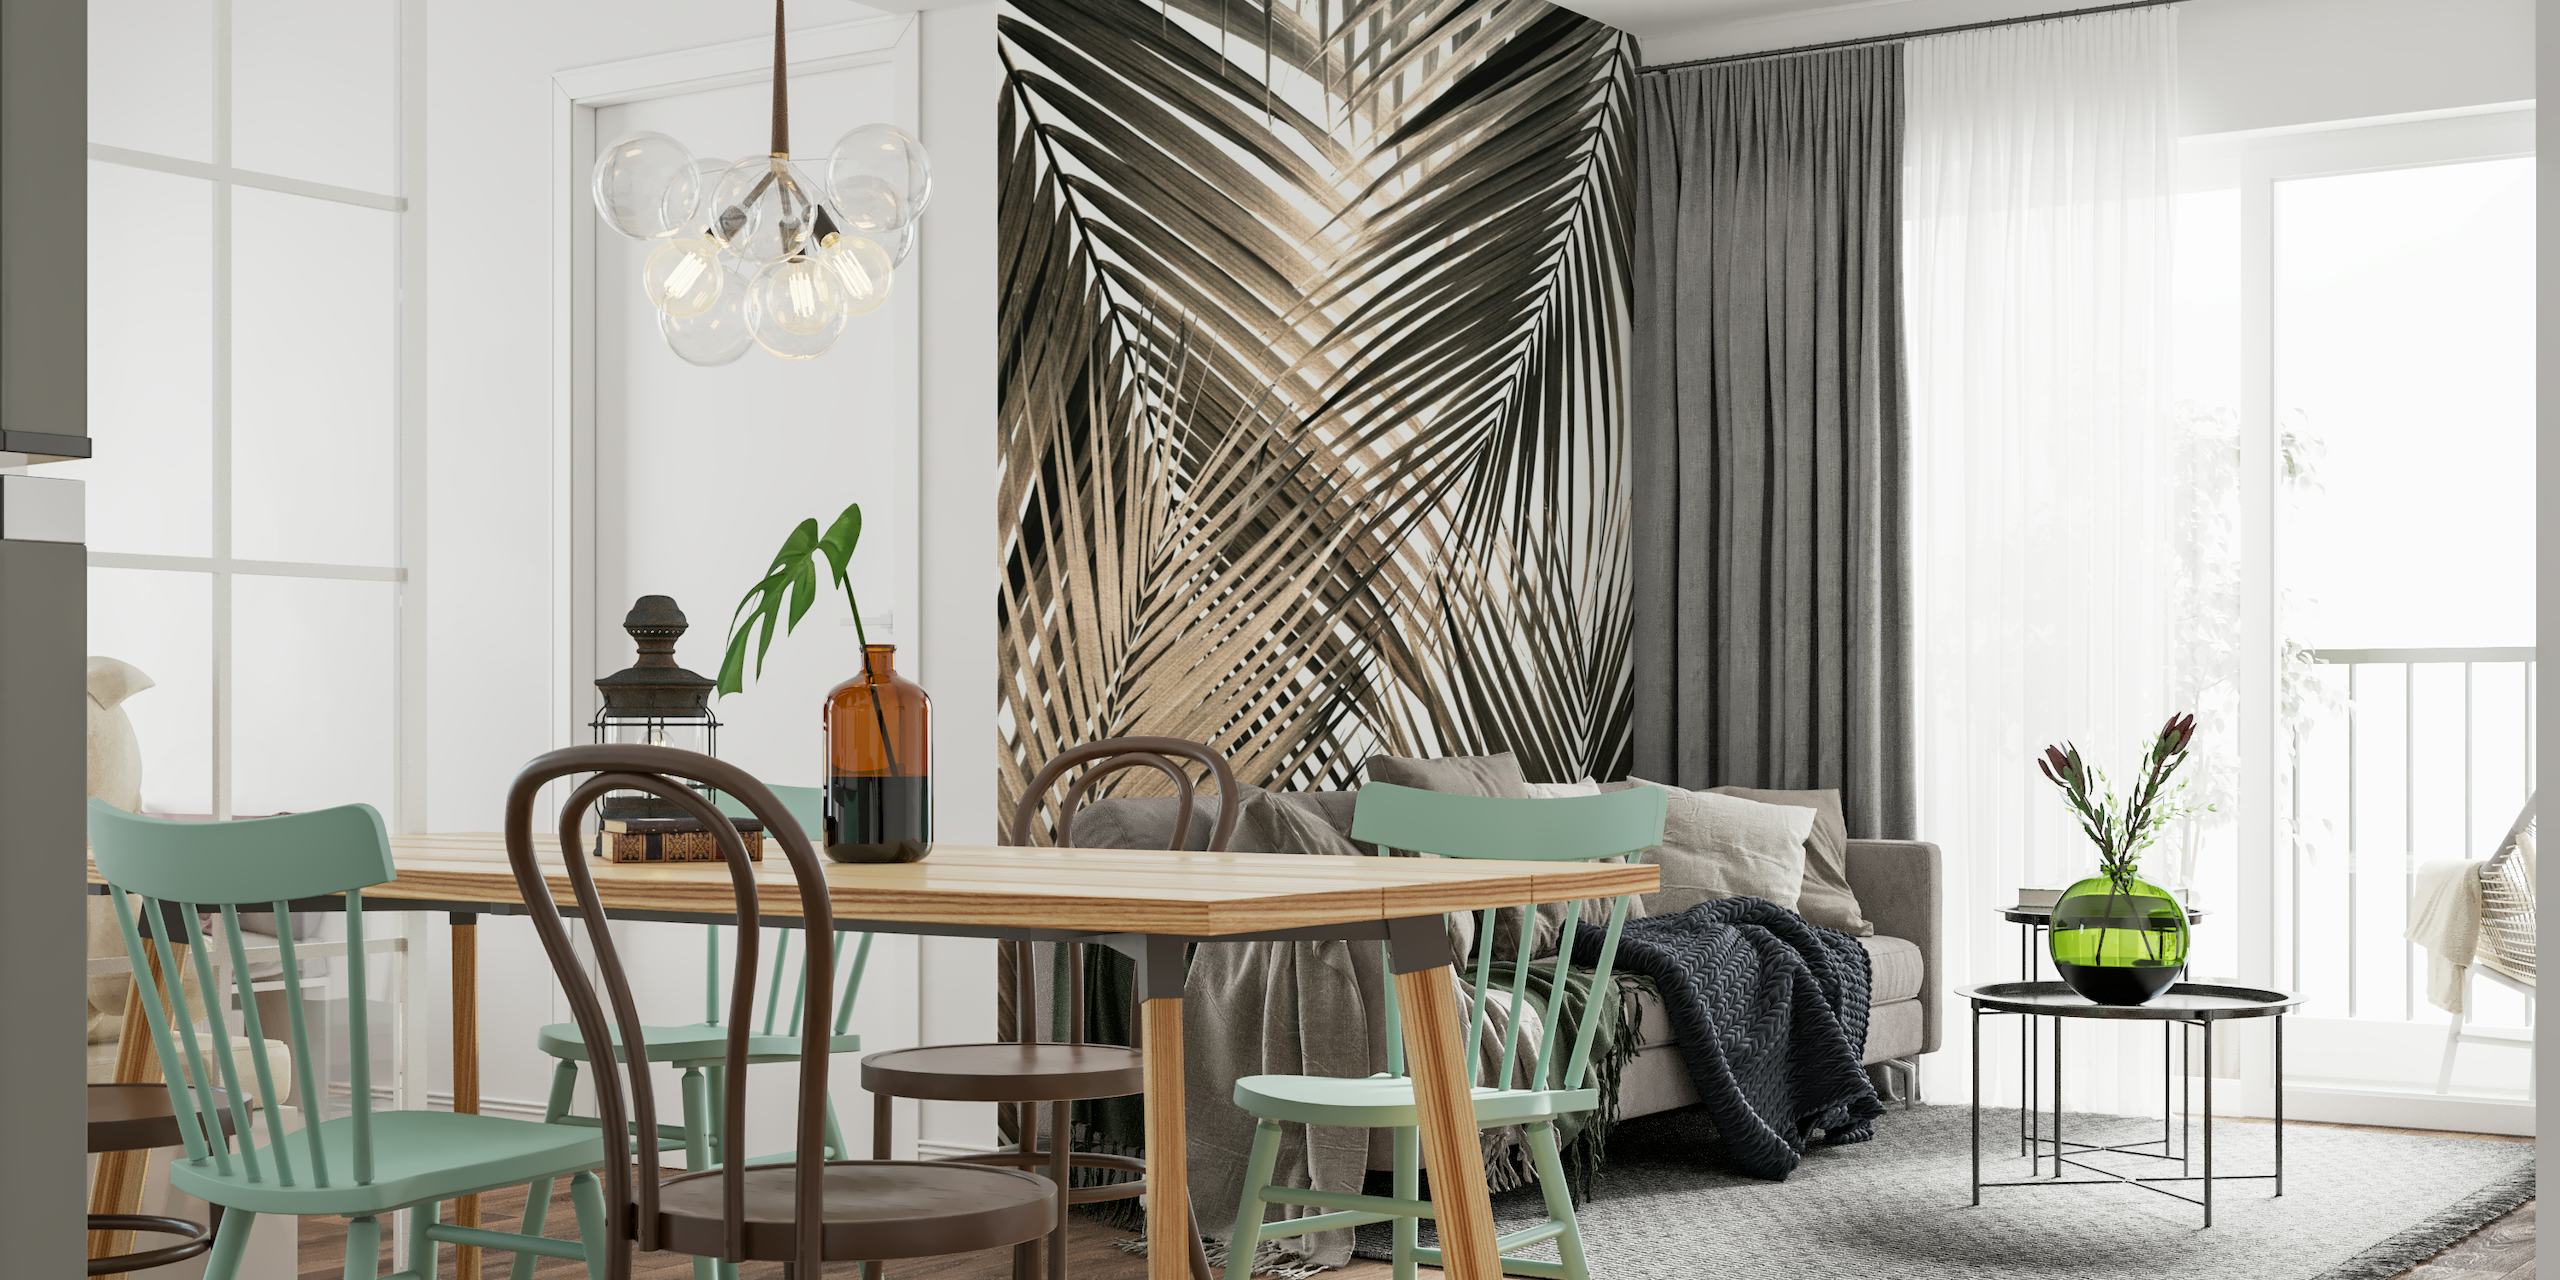 Lush Golden Brown Palm Leaves Wallpaper adding warmth and style